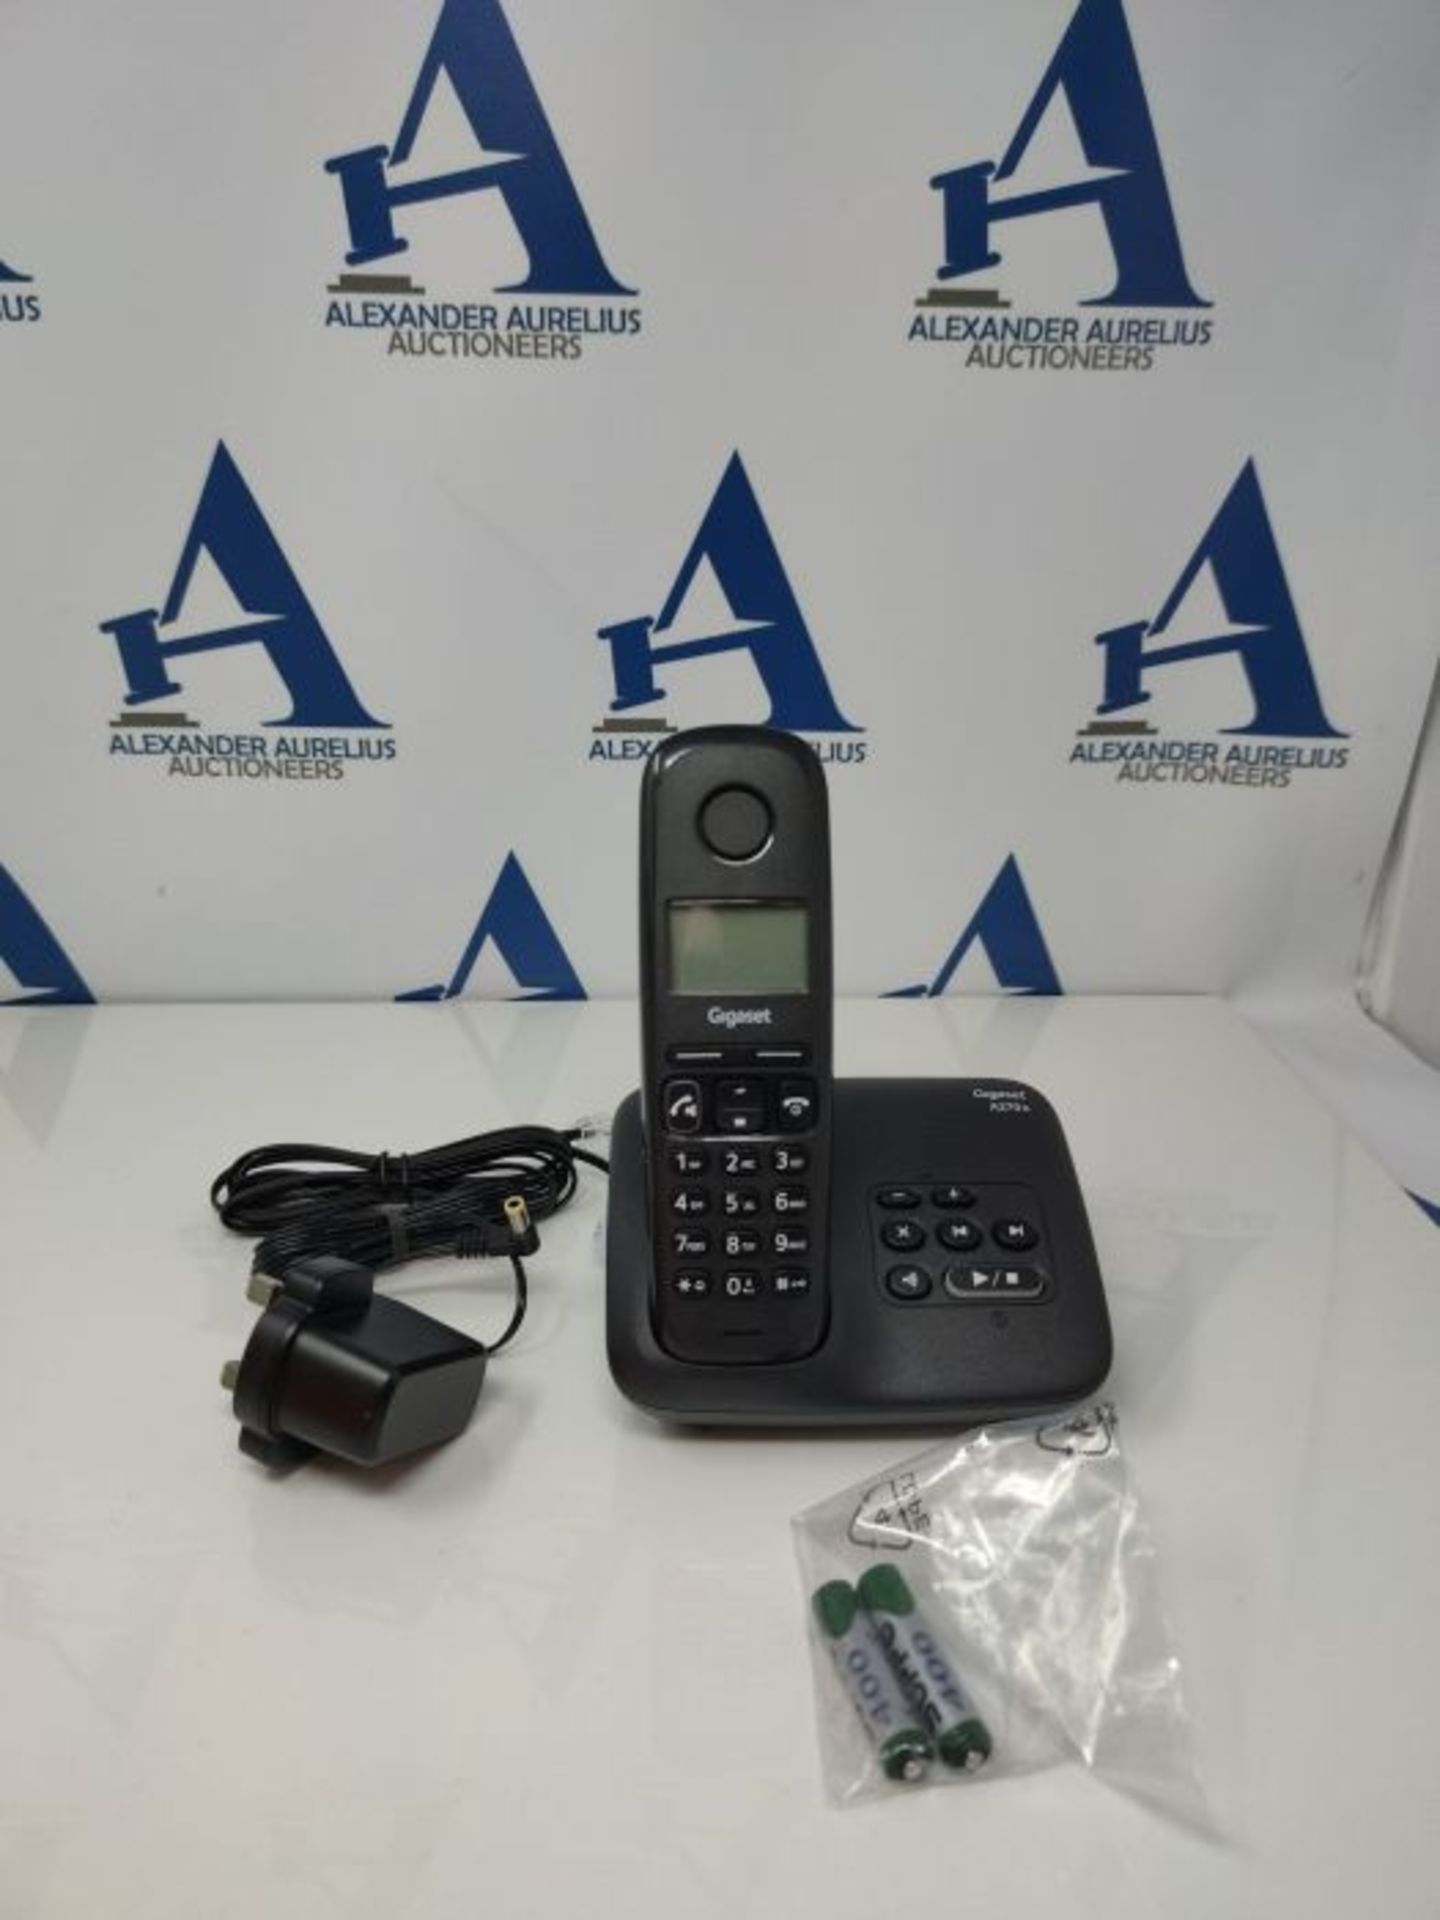 Gigaset A270A - Basic Cordless Home Phone with Big Display, Answer Machine and Speaker - Image 3 of 3